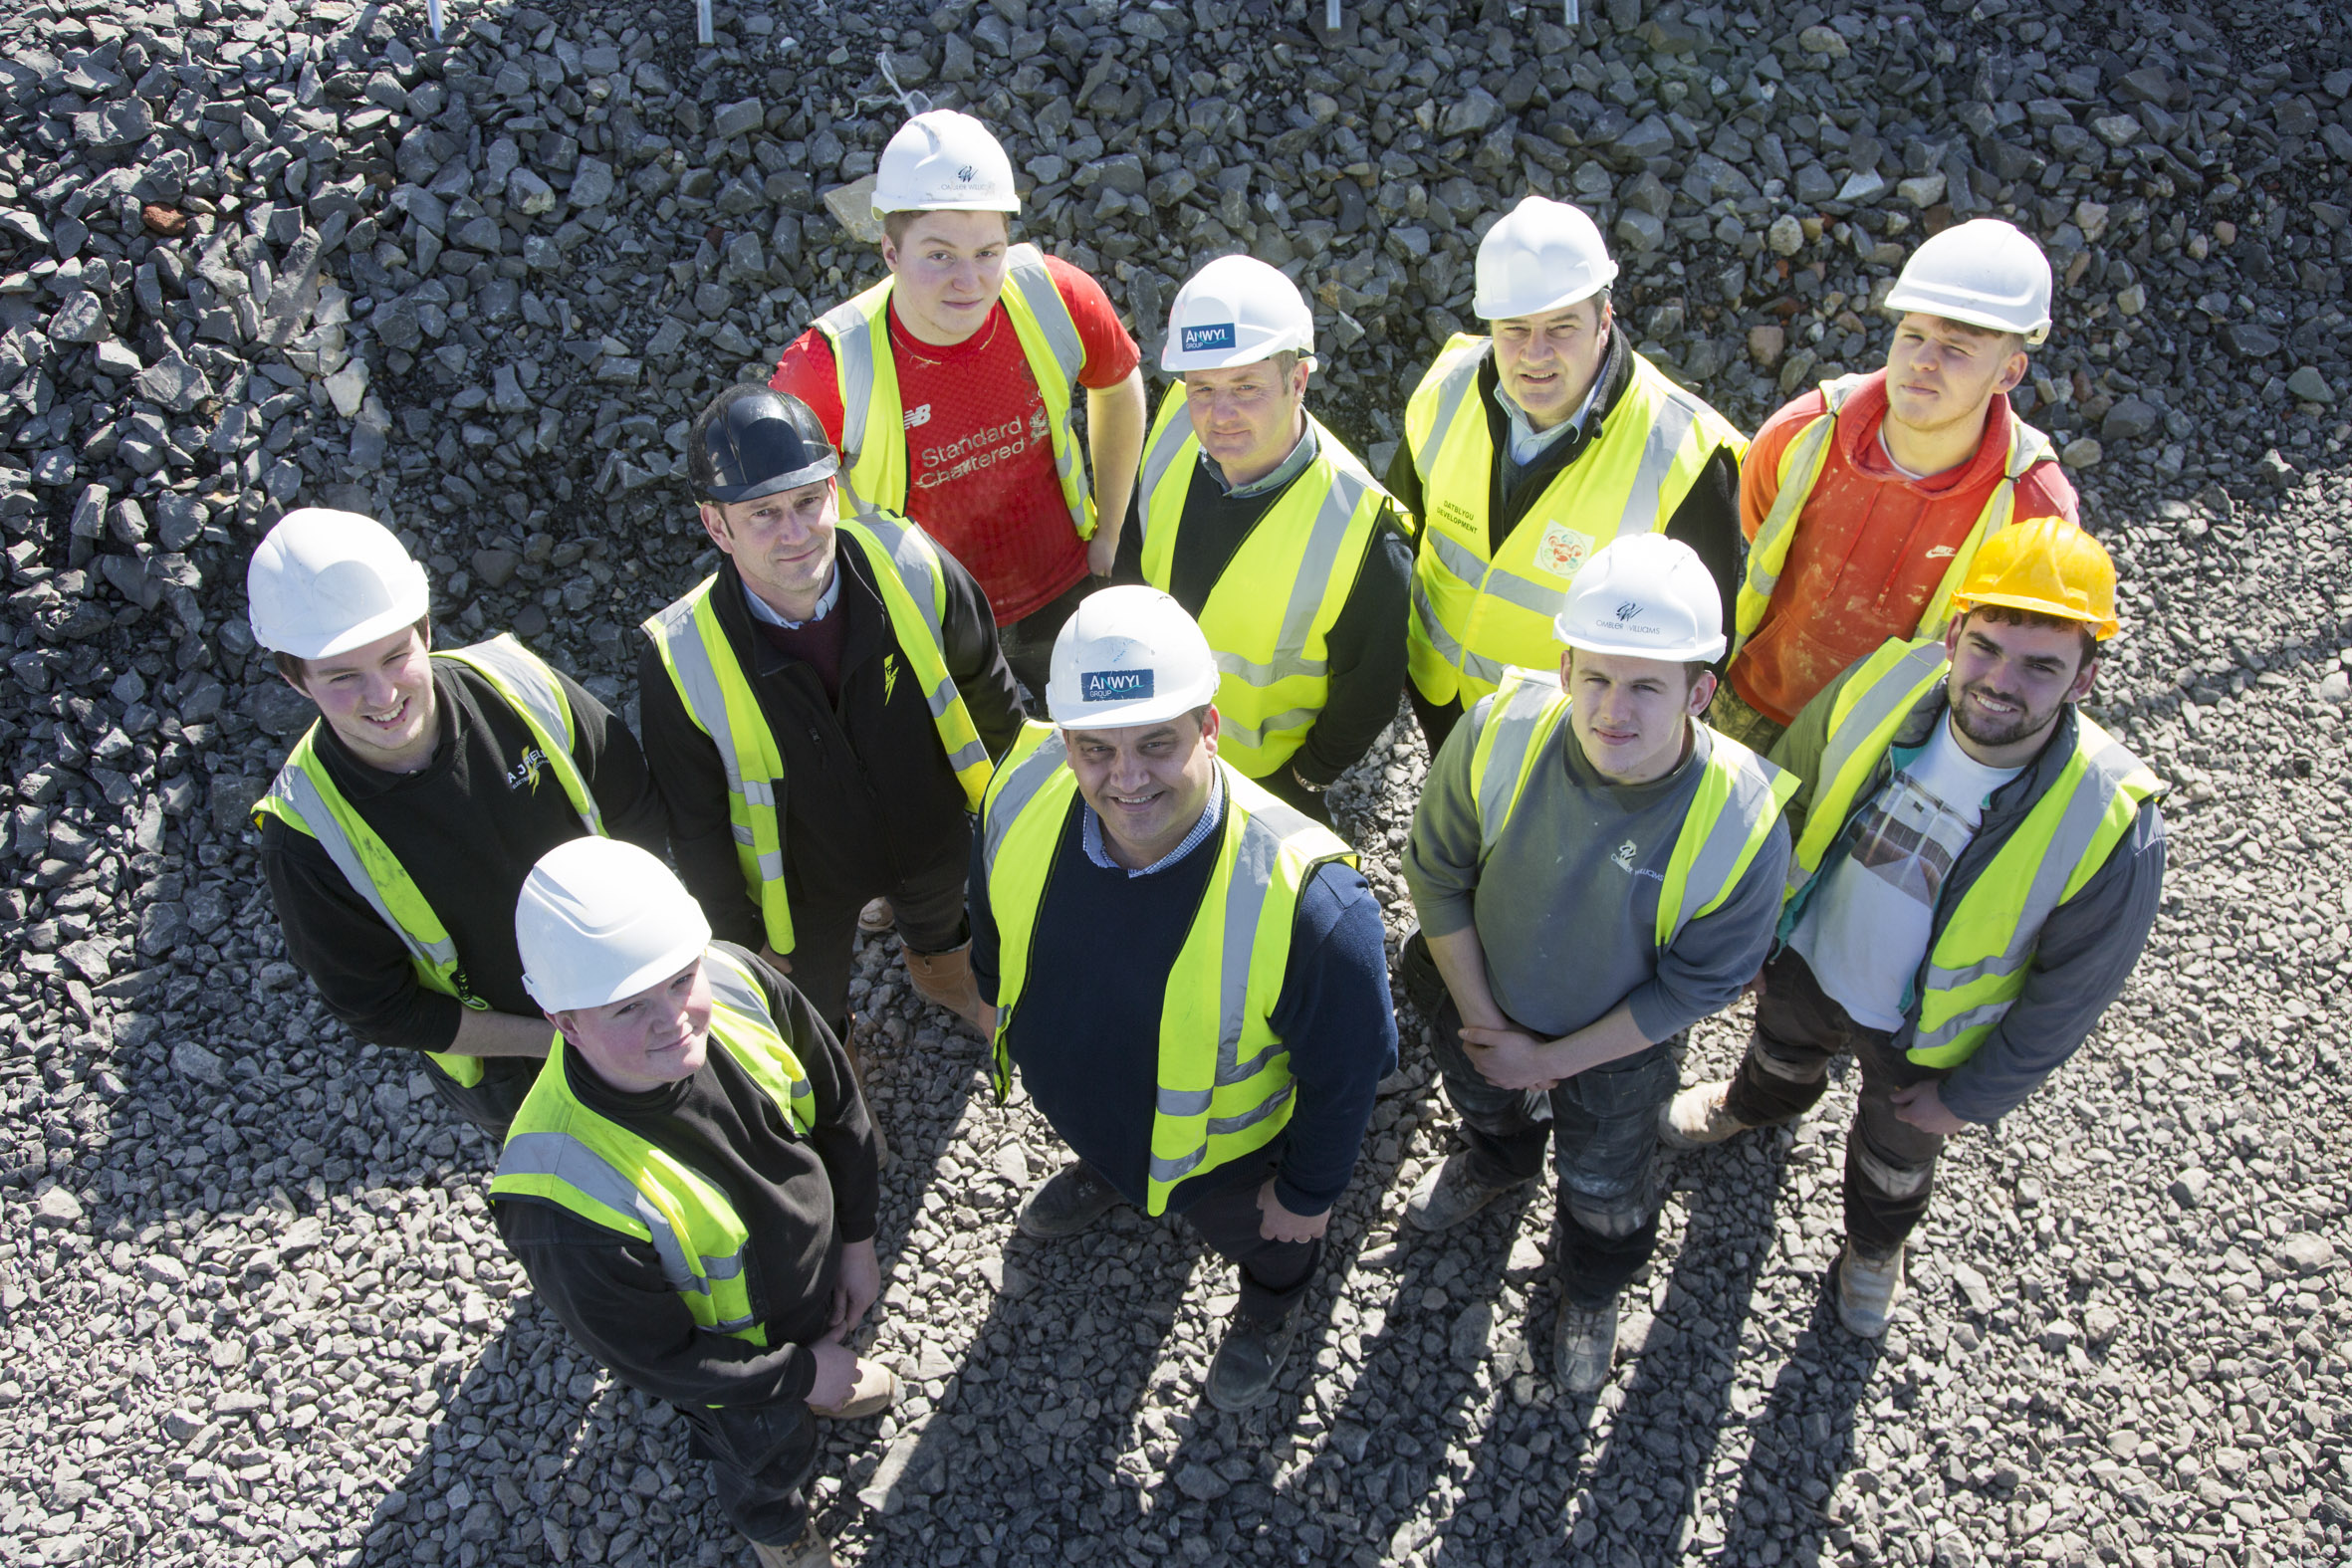 Top builder teams up with housing provider to create apprenticeships